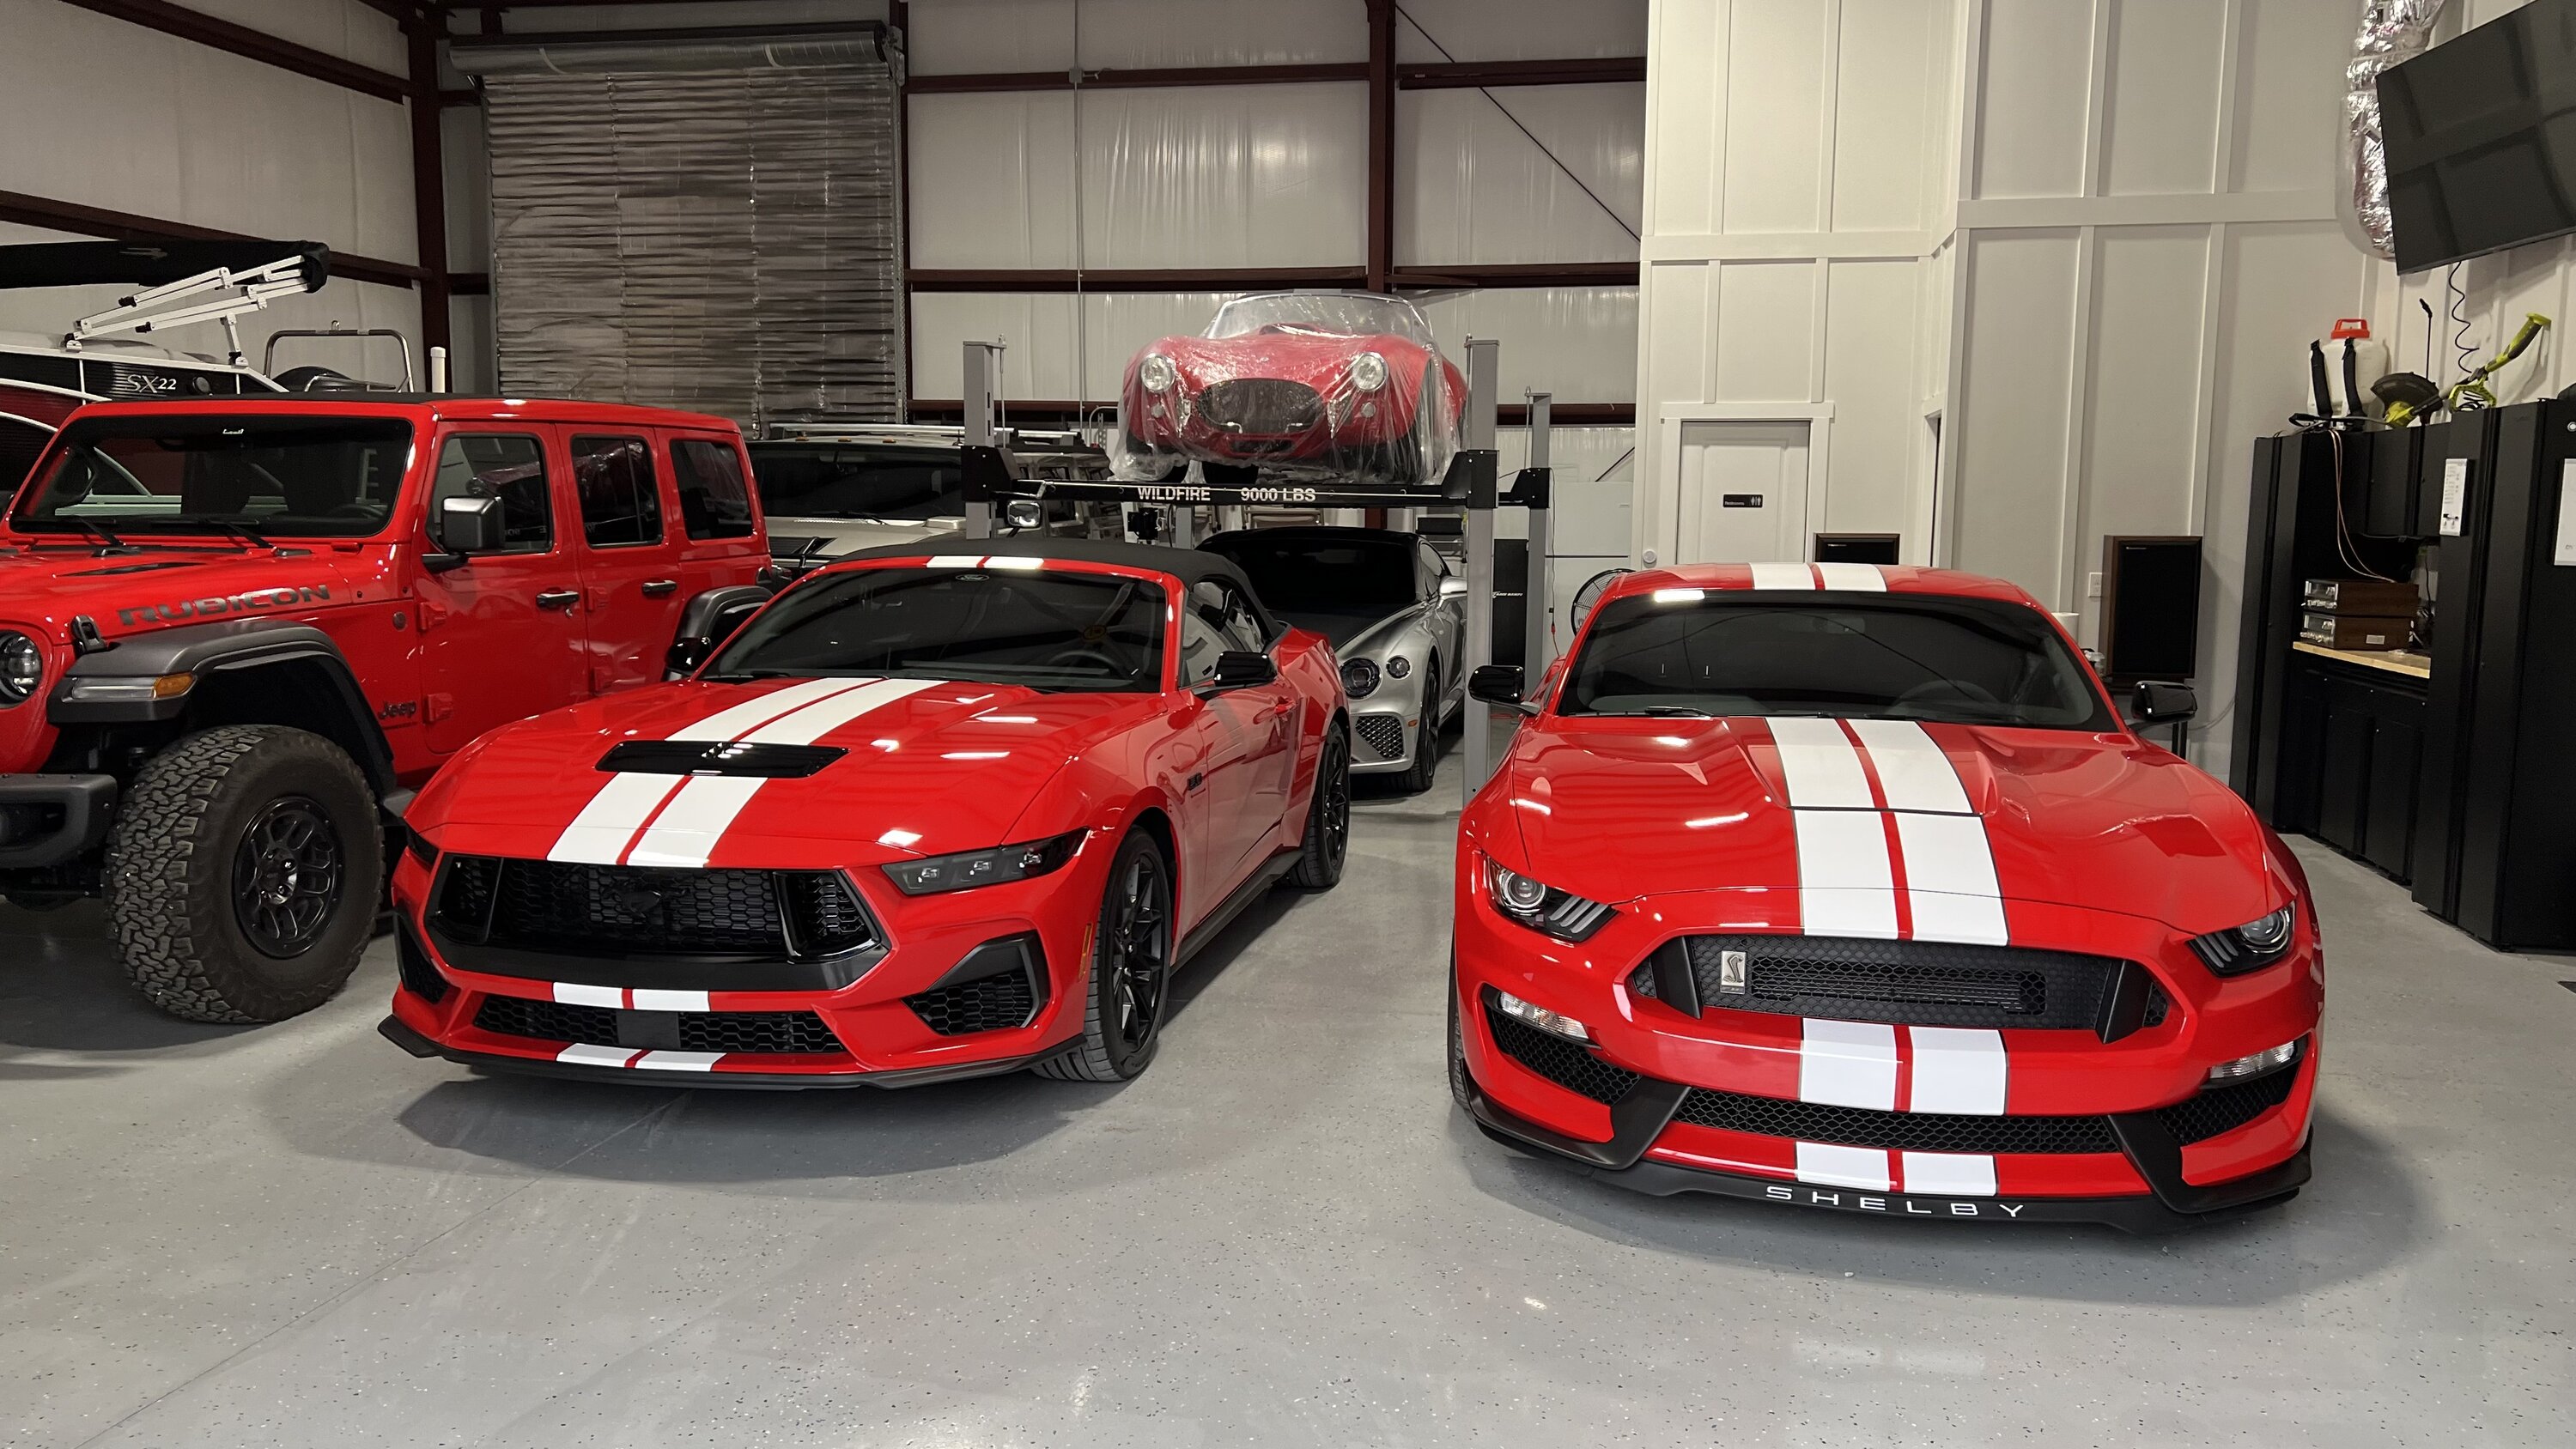 S650 Mustang S650 Red convertible with stripes next to GT350 IMG_9421